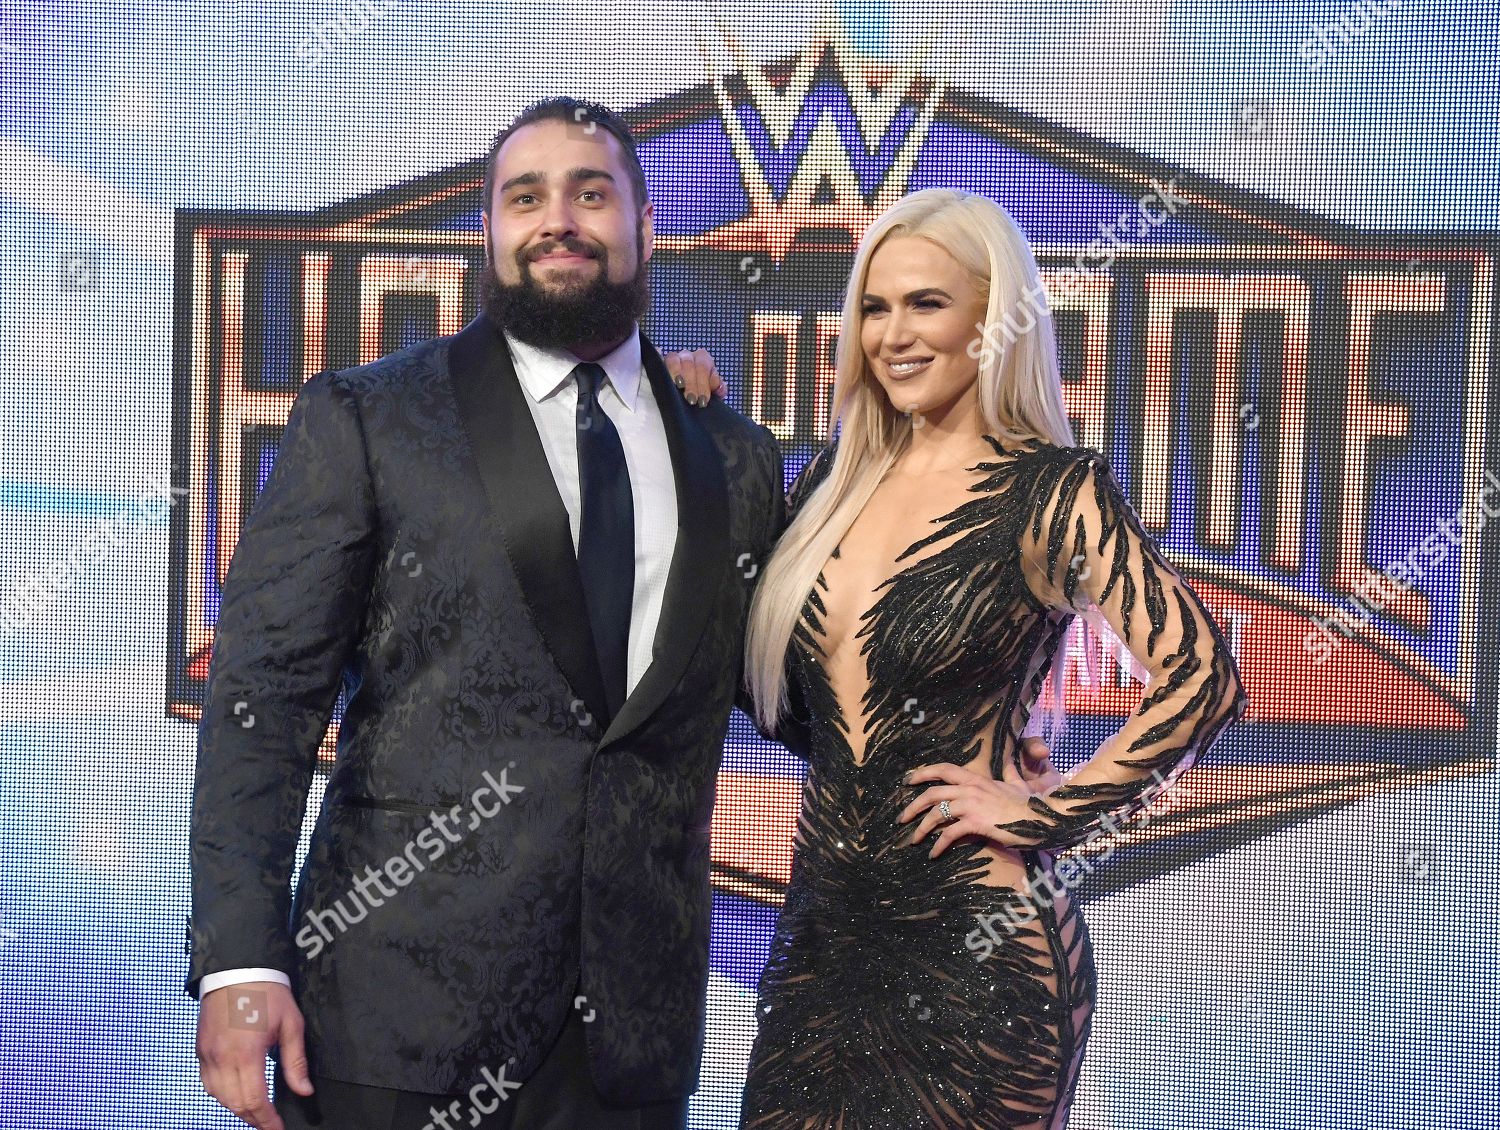 WWE Hall of Fame 2019 - Recuento Wwe-hall-of-fame-induction-new-orleans-usa-shutterstock-editorial-9623294h